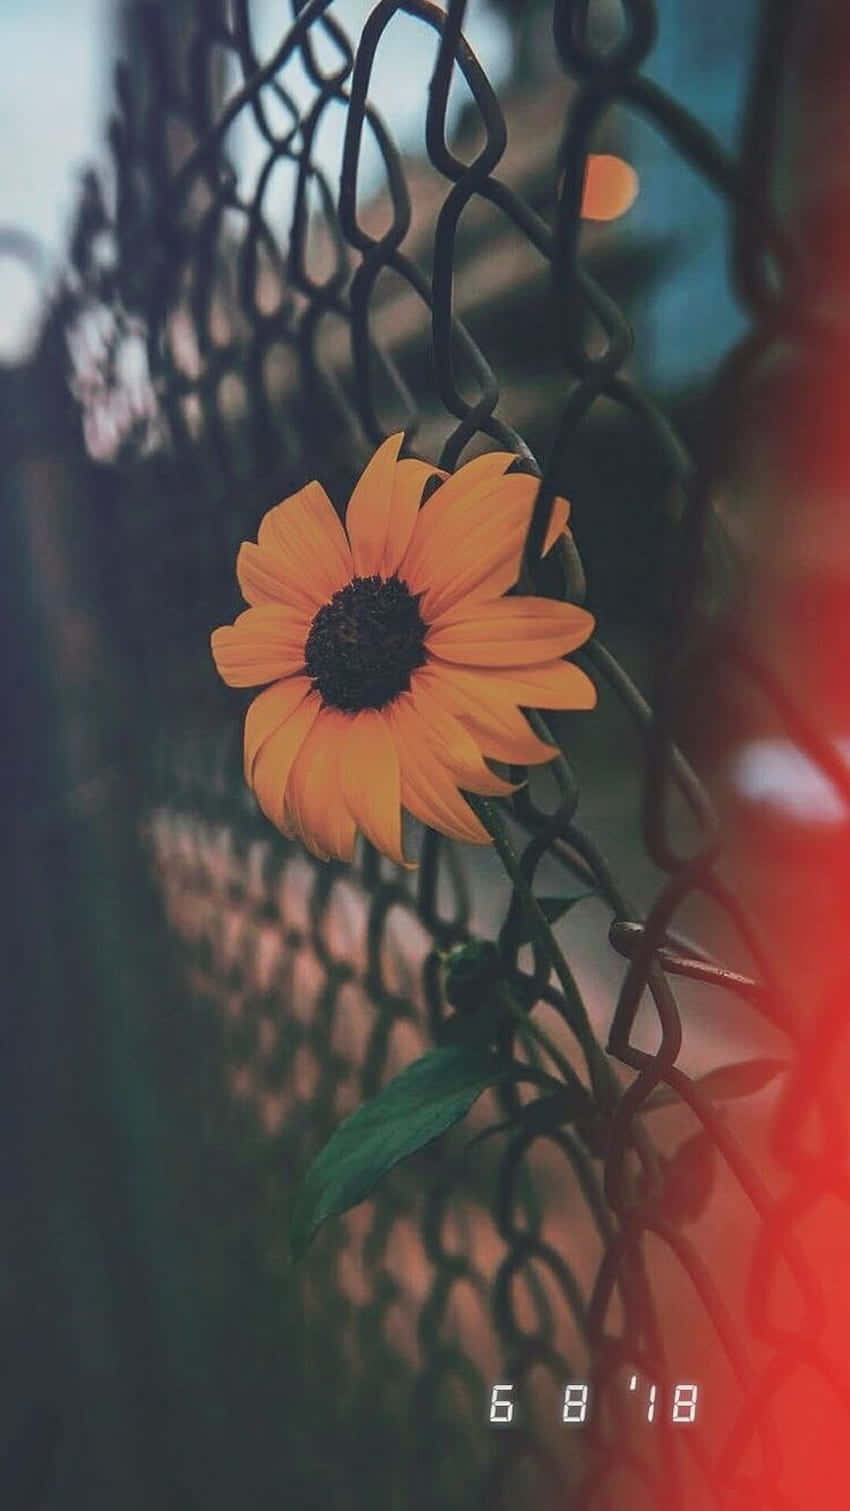 Enjoy Nature's Beauty with Sunflowers on Your iPhone Wallpaper